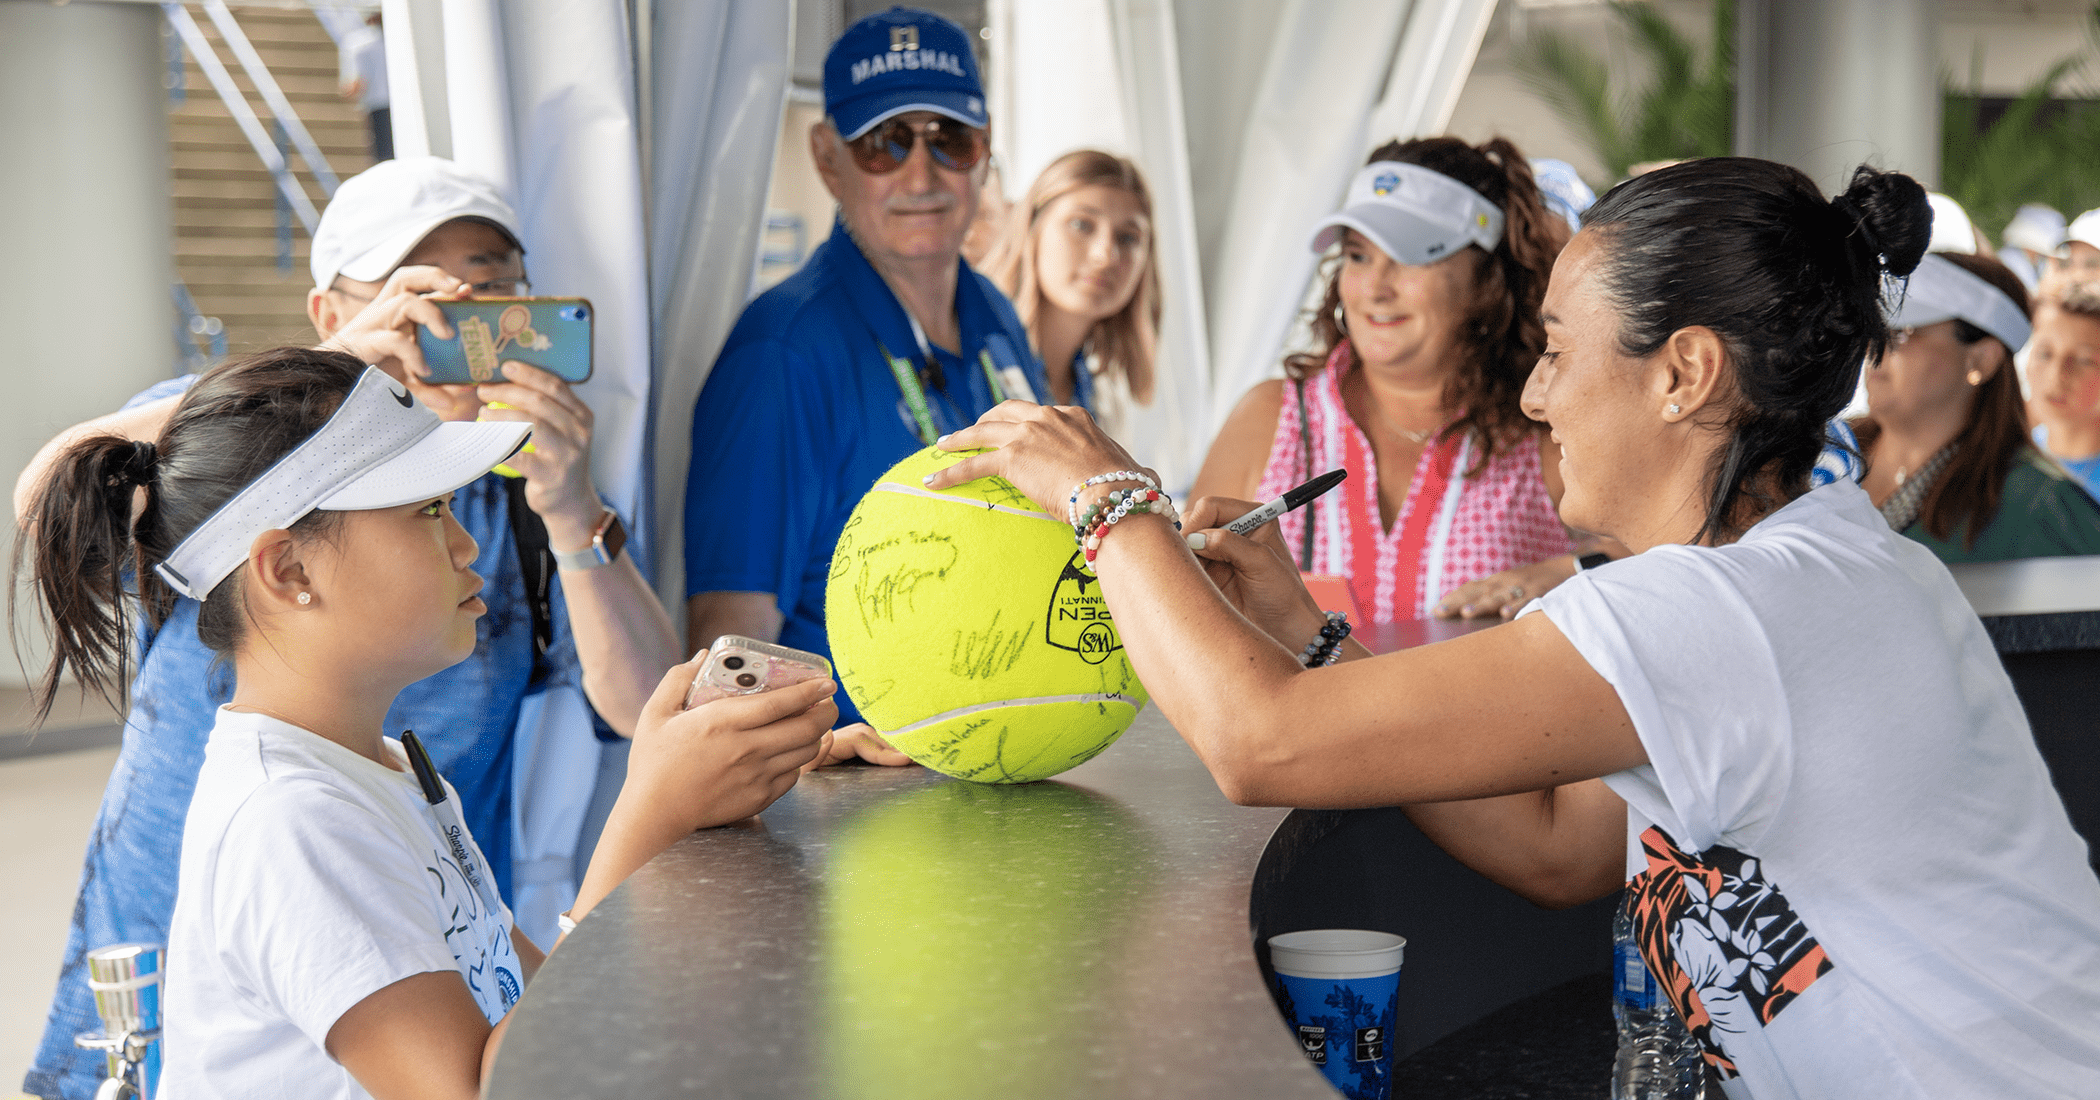 2023 Western & Southern Open Draws Nearly 195,000 Fans